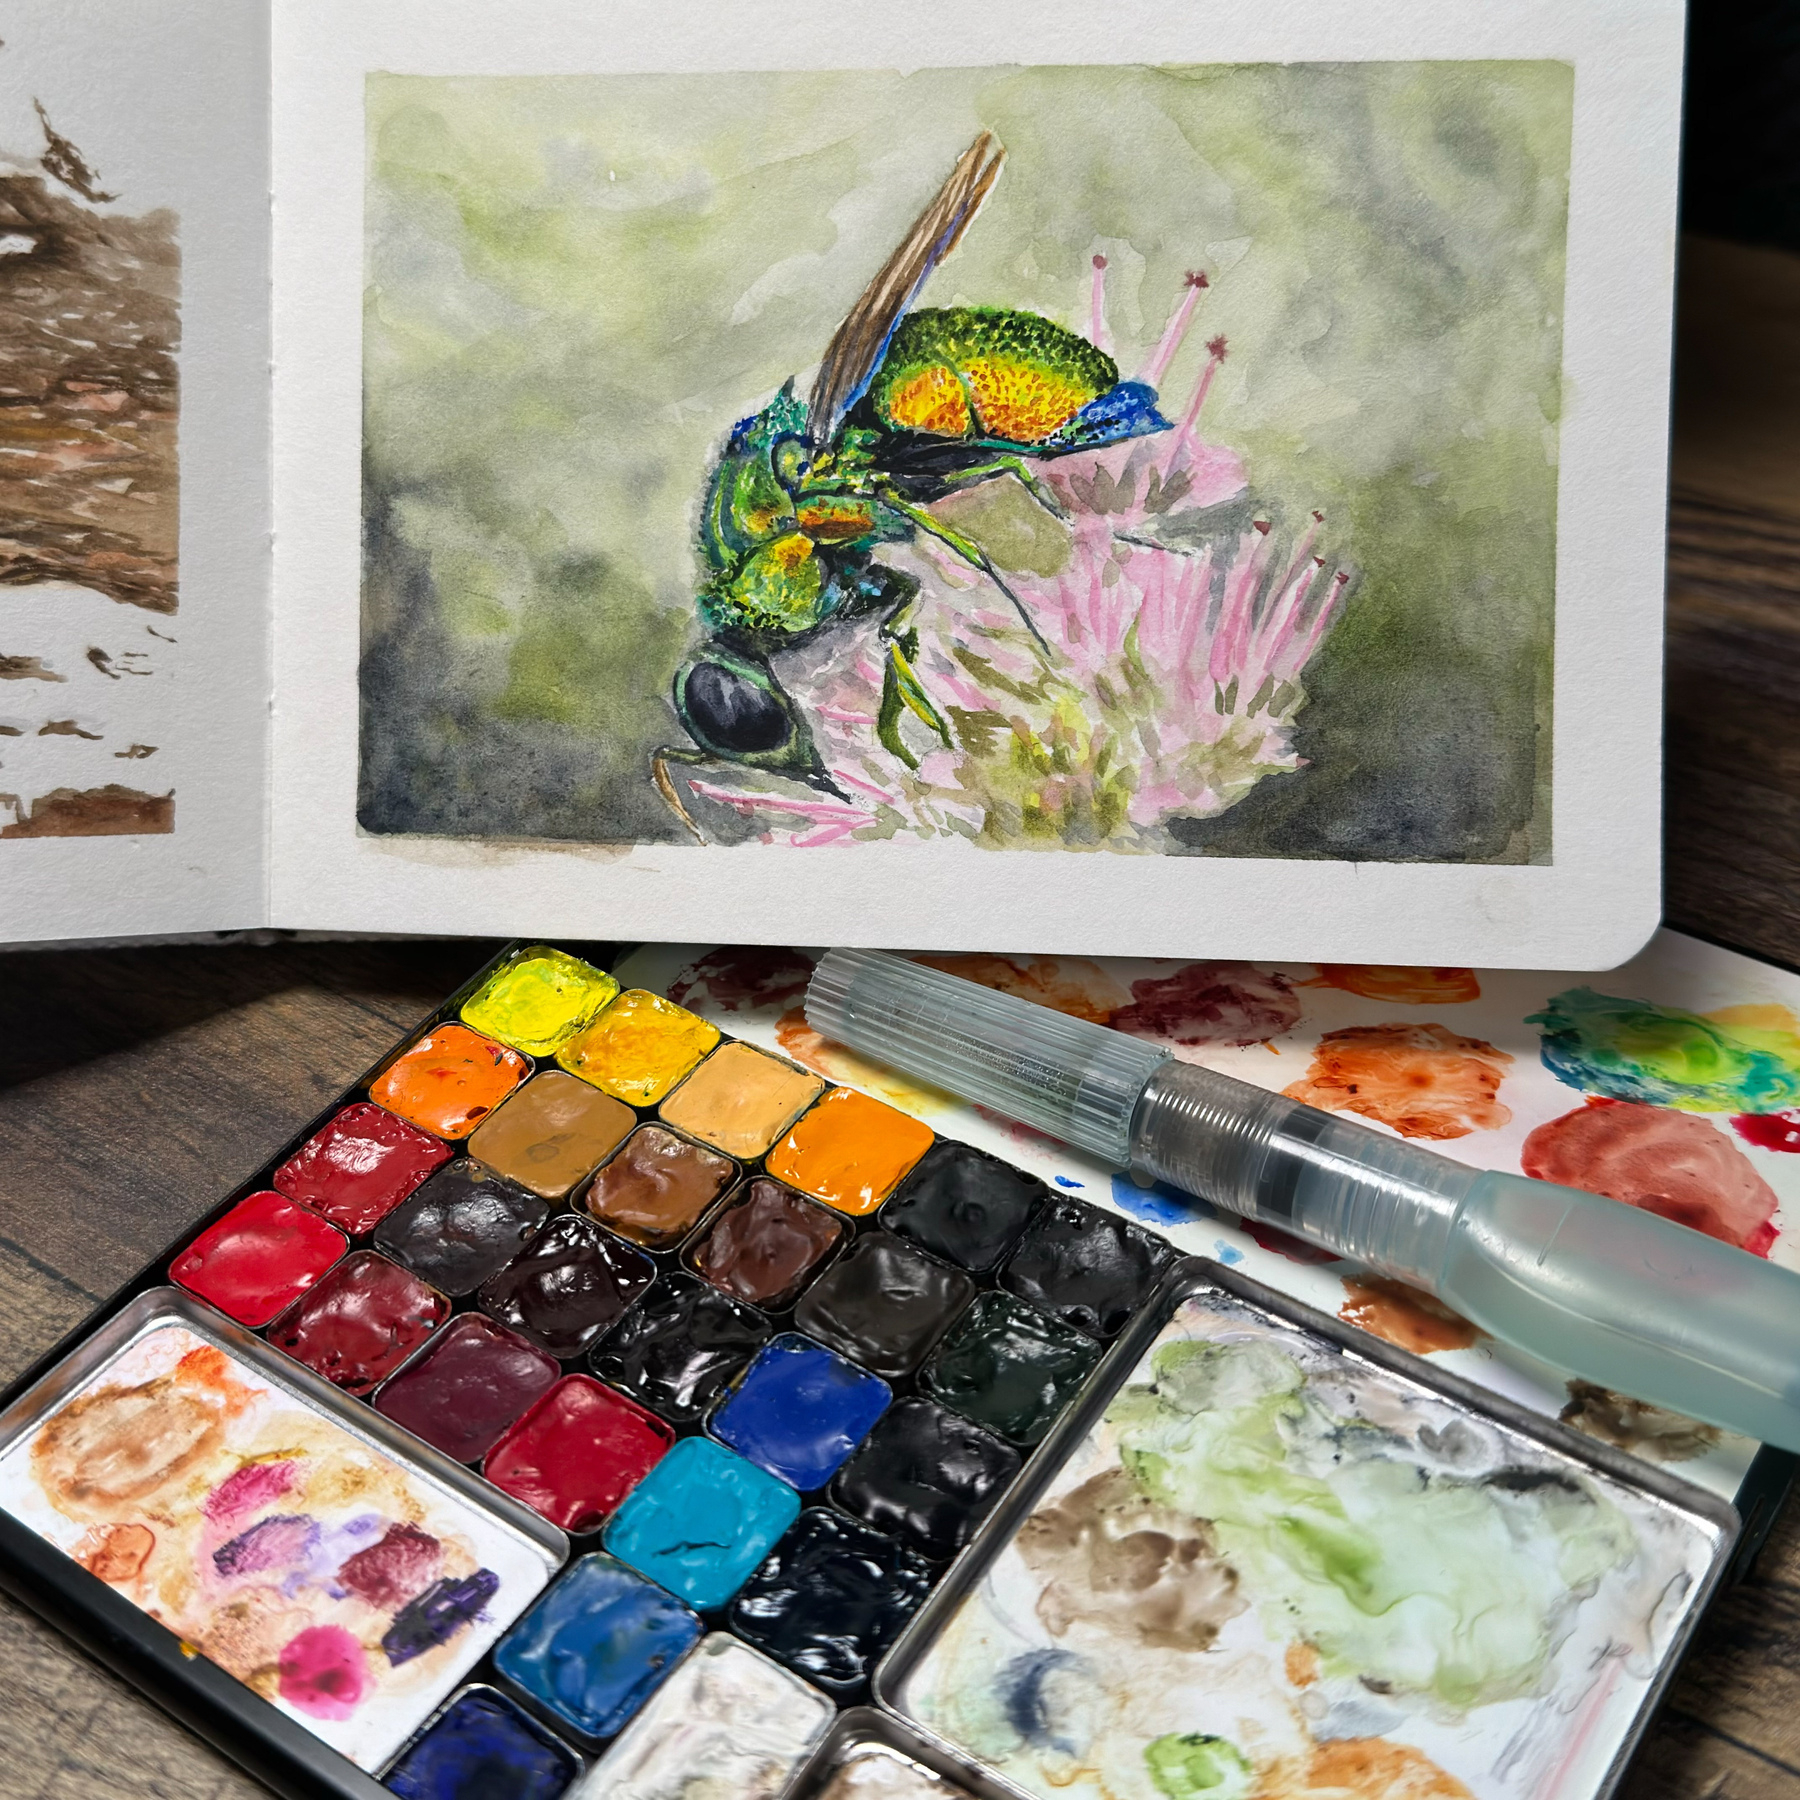 A watercolor painting of an emerald cuckoo wasp with its shimmering green and blue hues, perched delicately on a cluster of pink flowers. Below the artwork is a well-used palette brimming with a rainbow of watercolor paints, accompanied by a water brush pen, all resting on a rustic wooden surface.